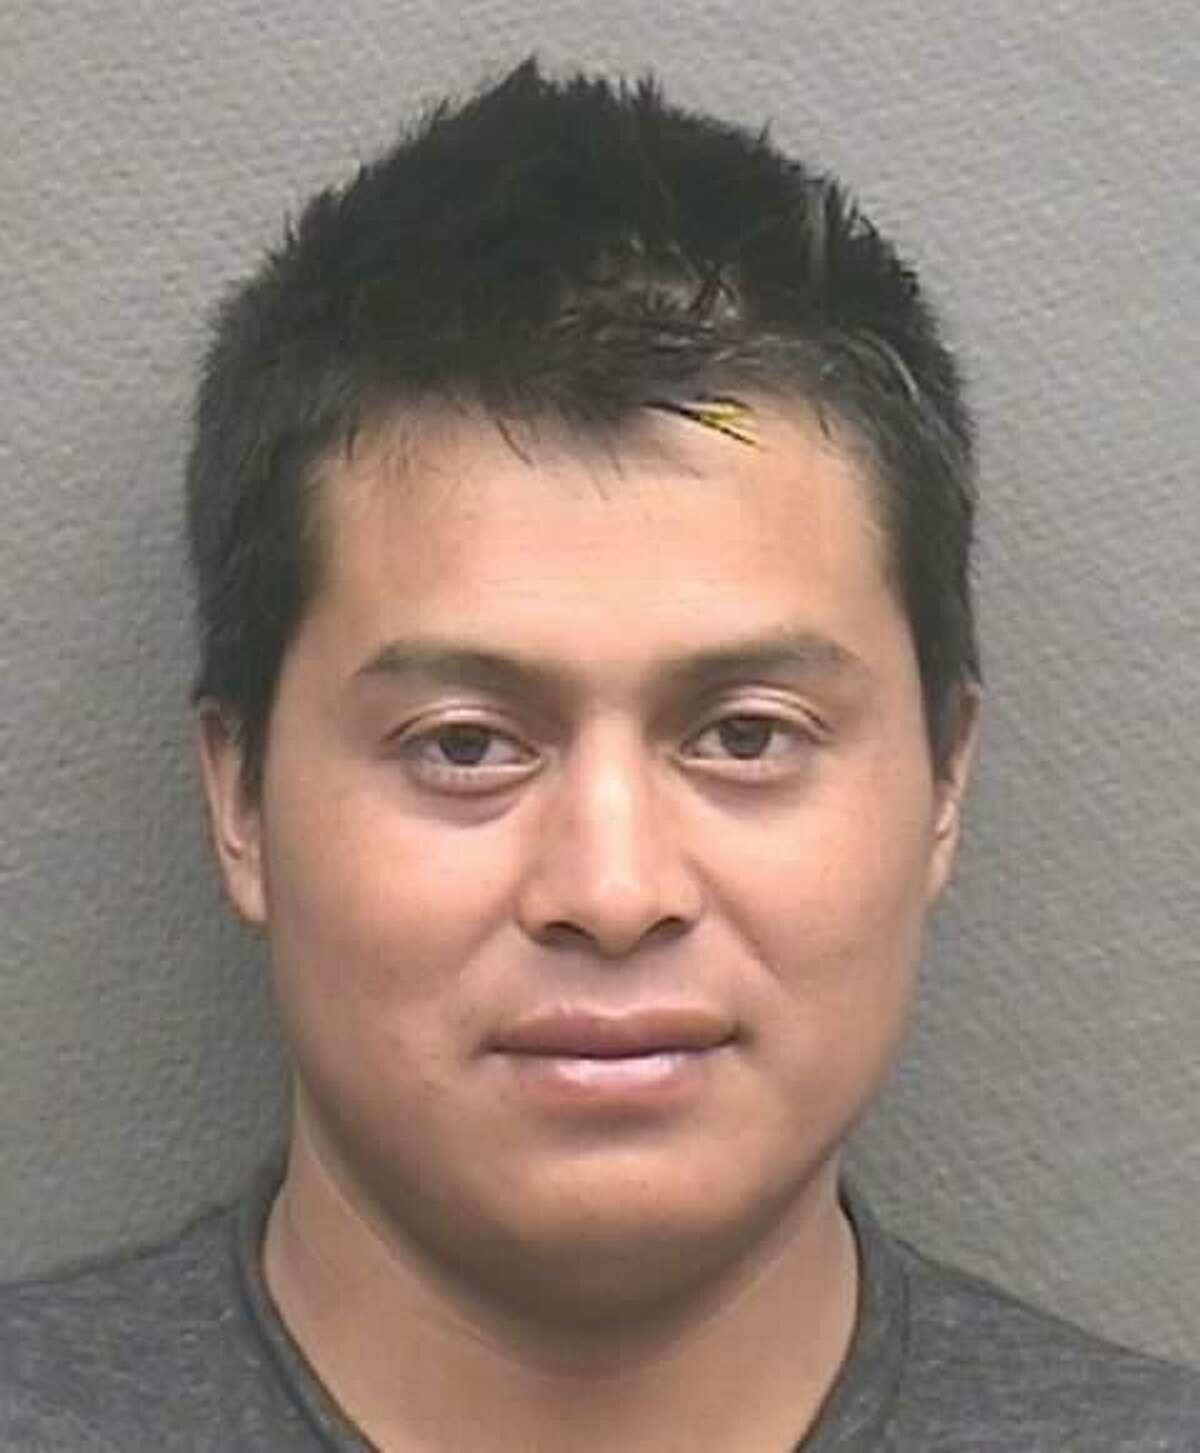 Francisco Yax Menchu of Houston is wanted by the Harris County Sheriff's Office on a charge of aggravated sexual assault of a child. His warrant is active as of August 9, 2017.